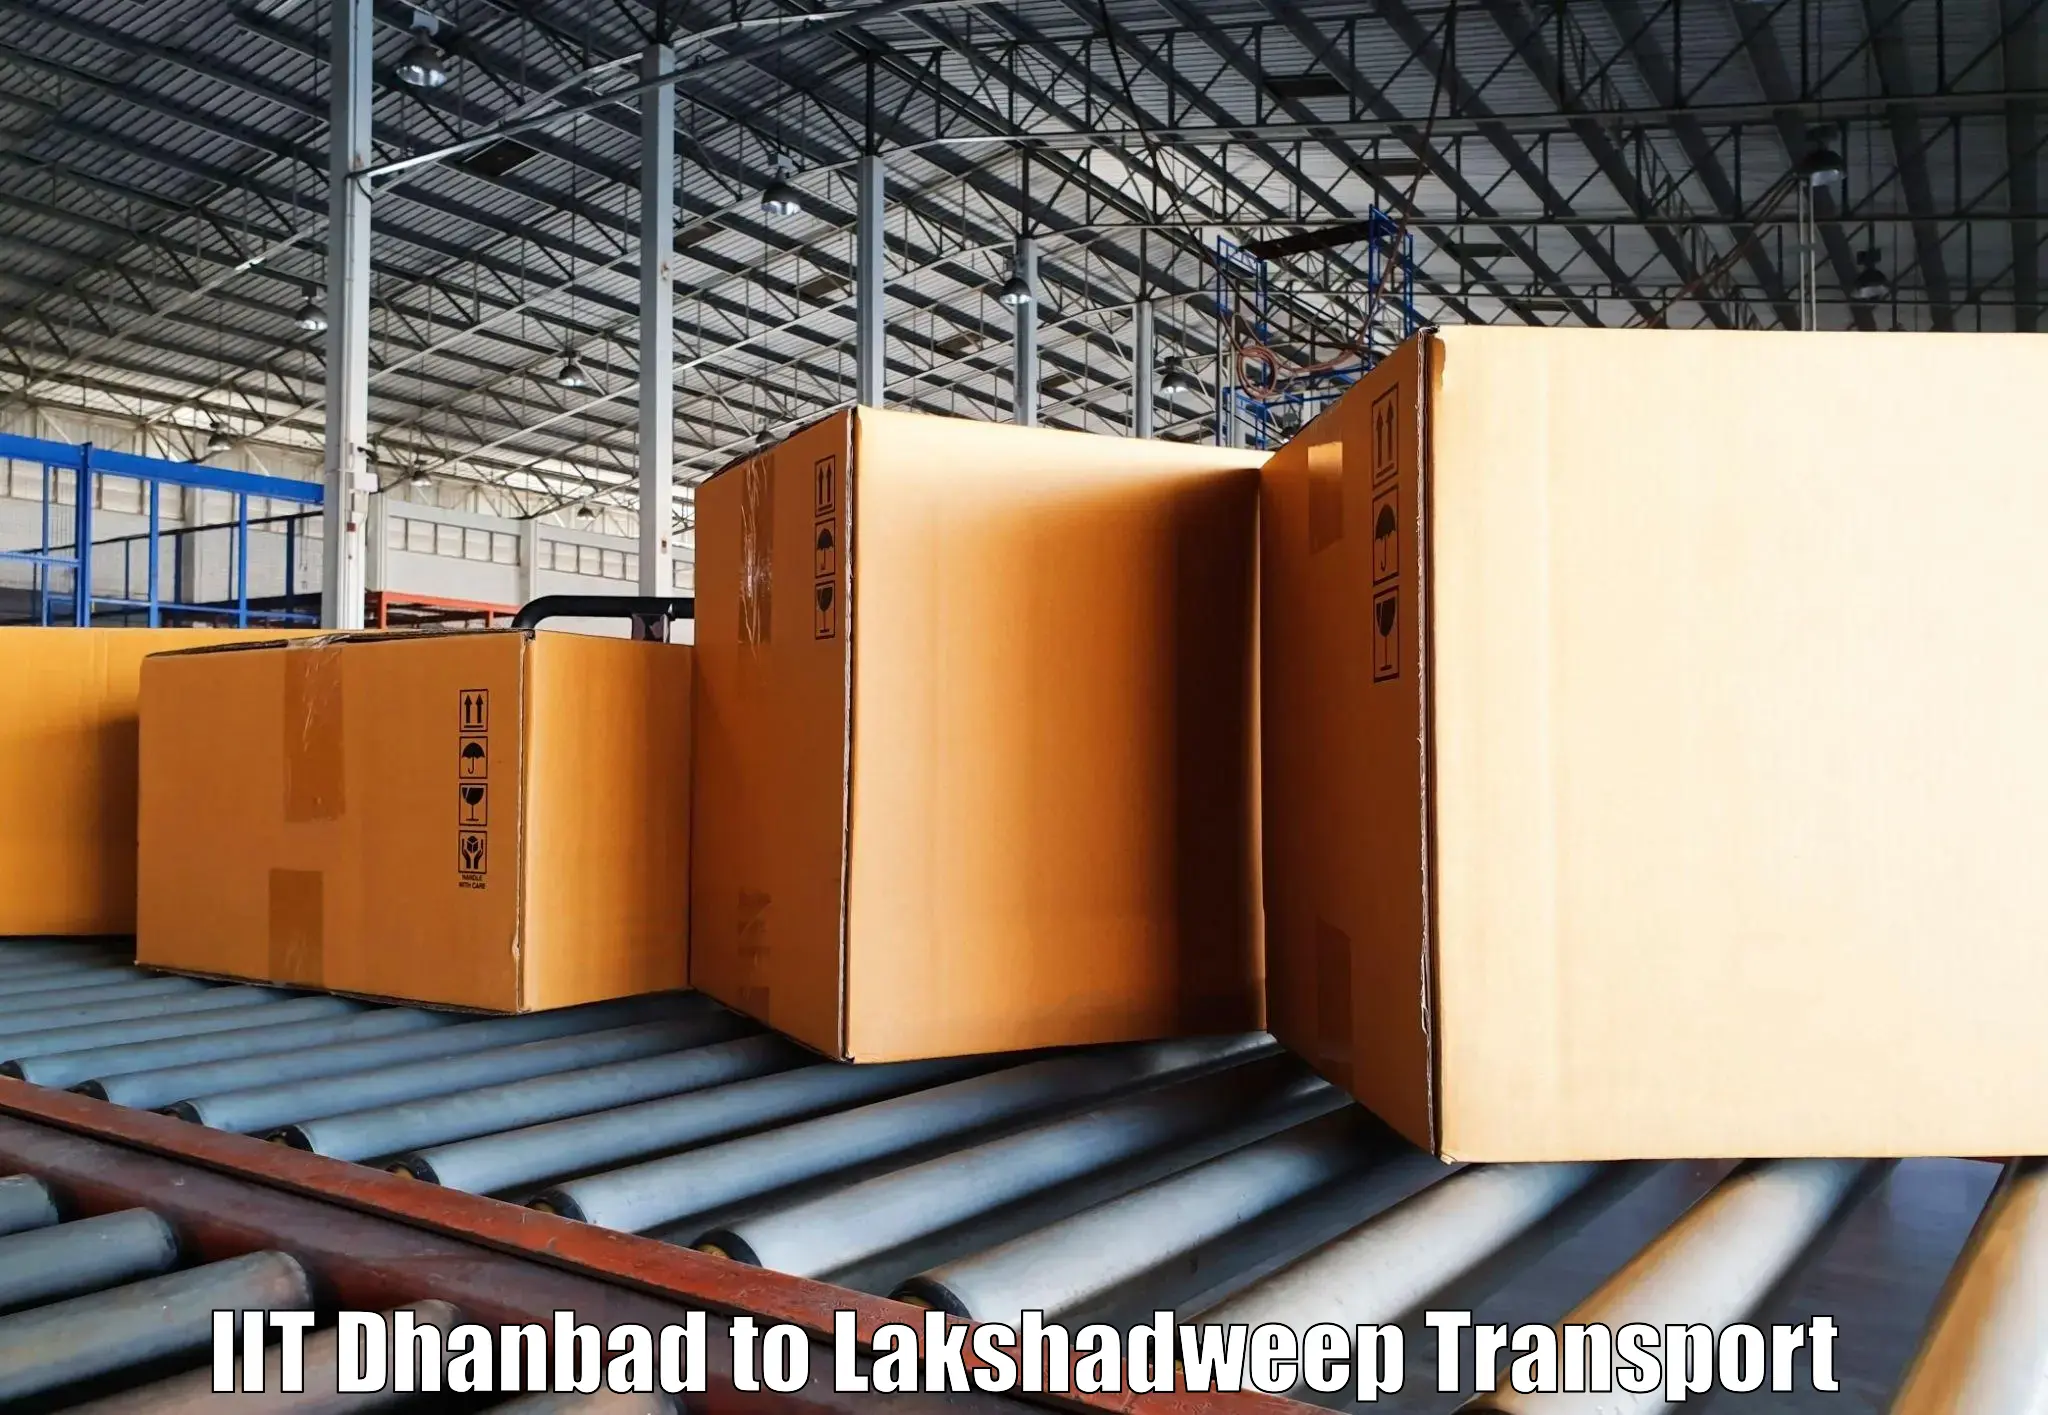 Land transport services in IIT Dhanbad to Lakshadweep